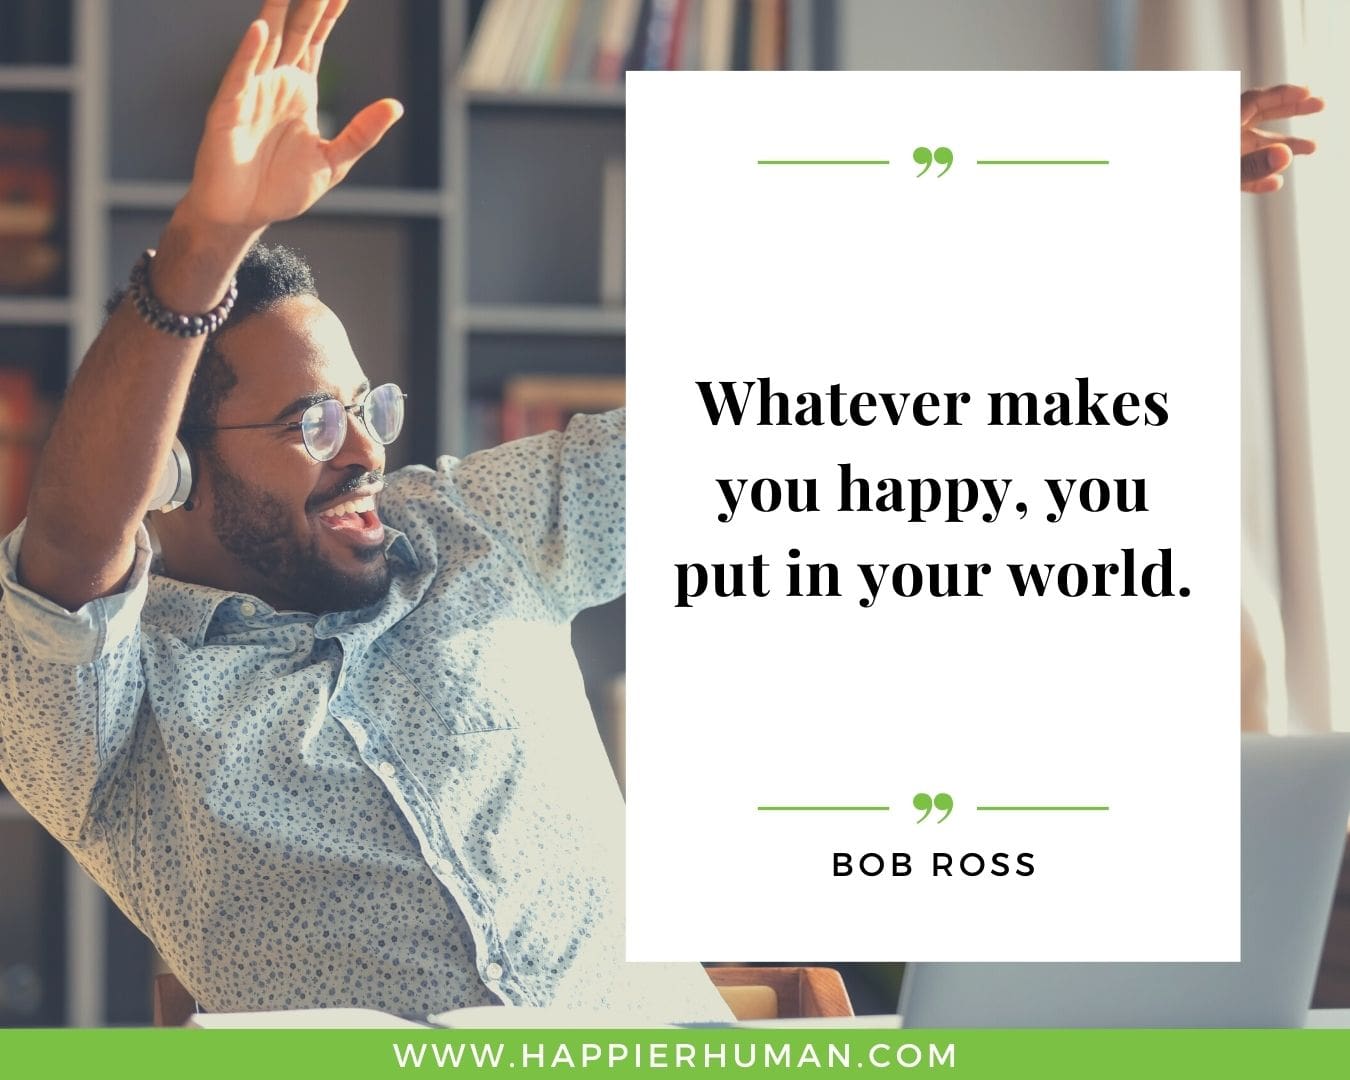 Positive Energy Quotes - “Whatever makes you happy, you put in your world.” - Bob Ross